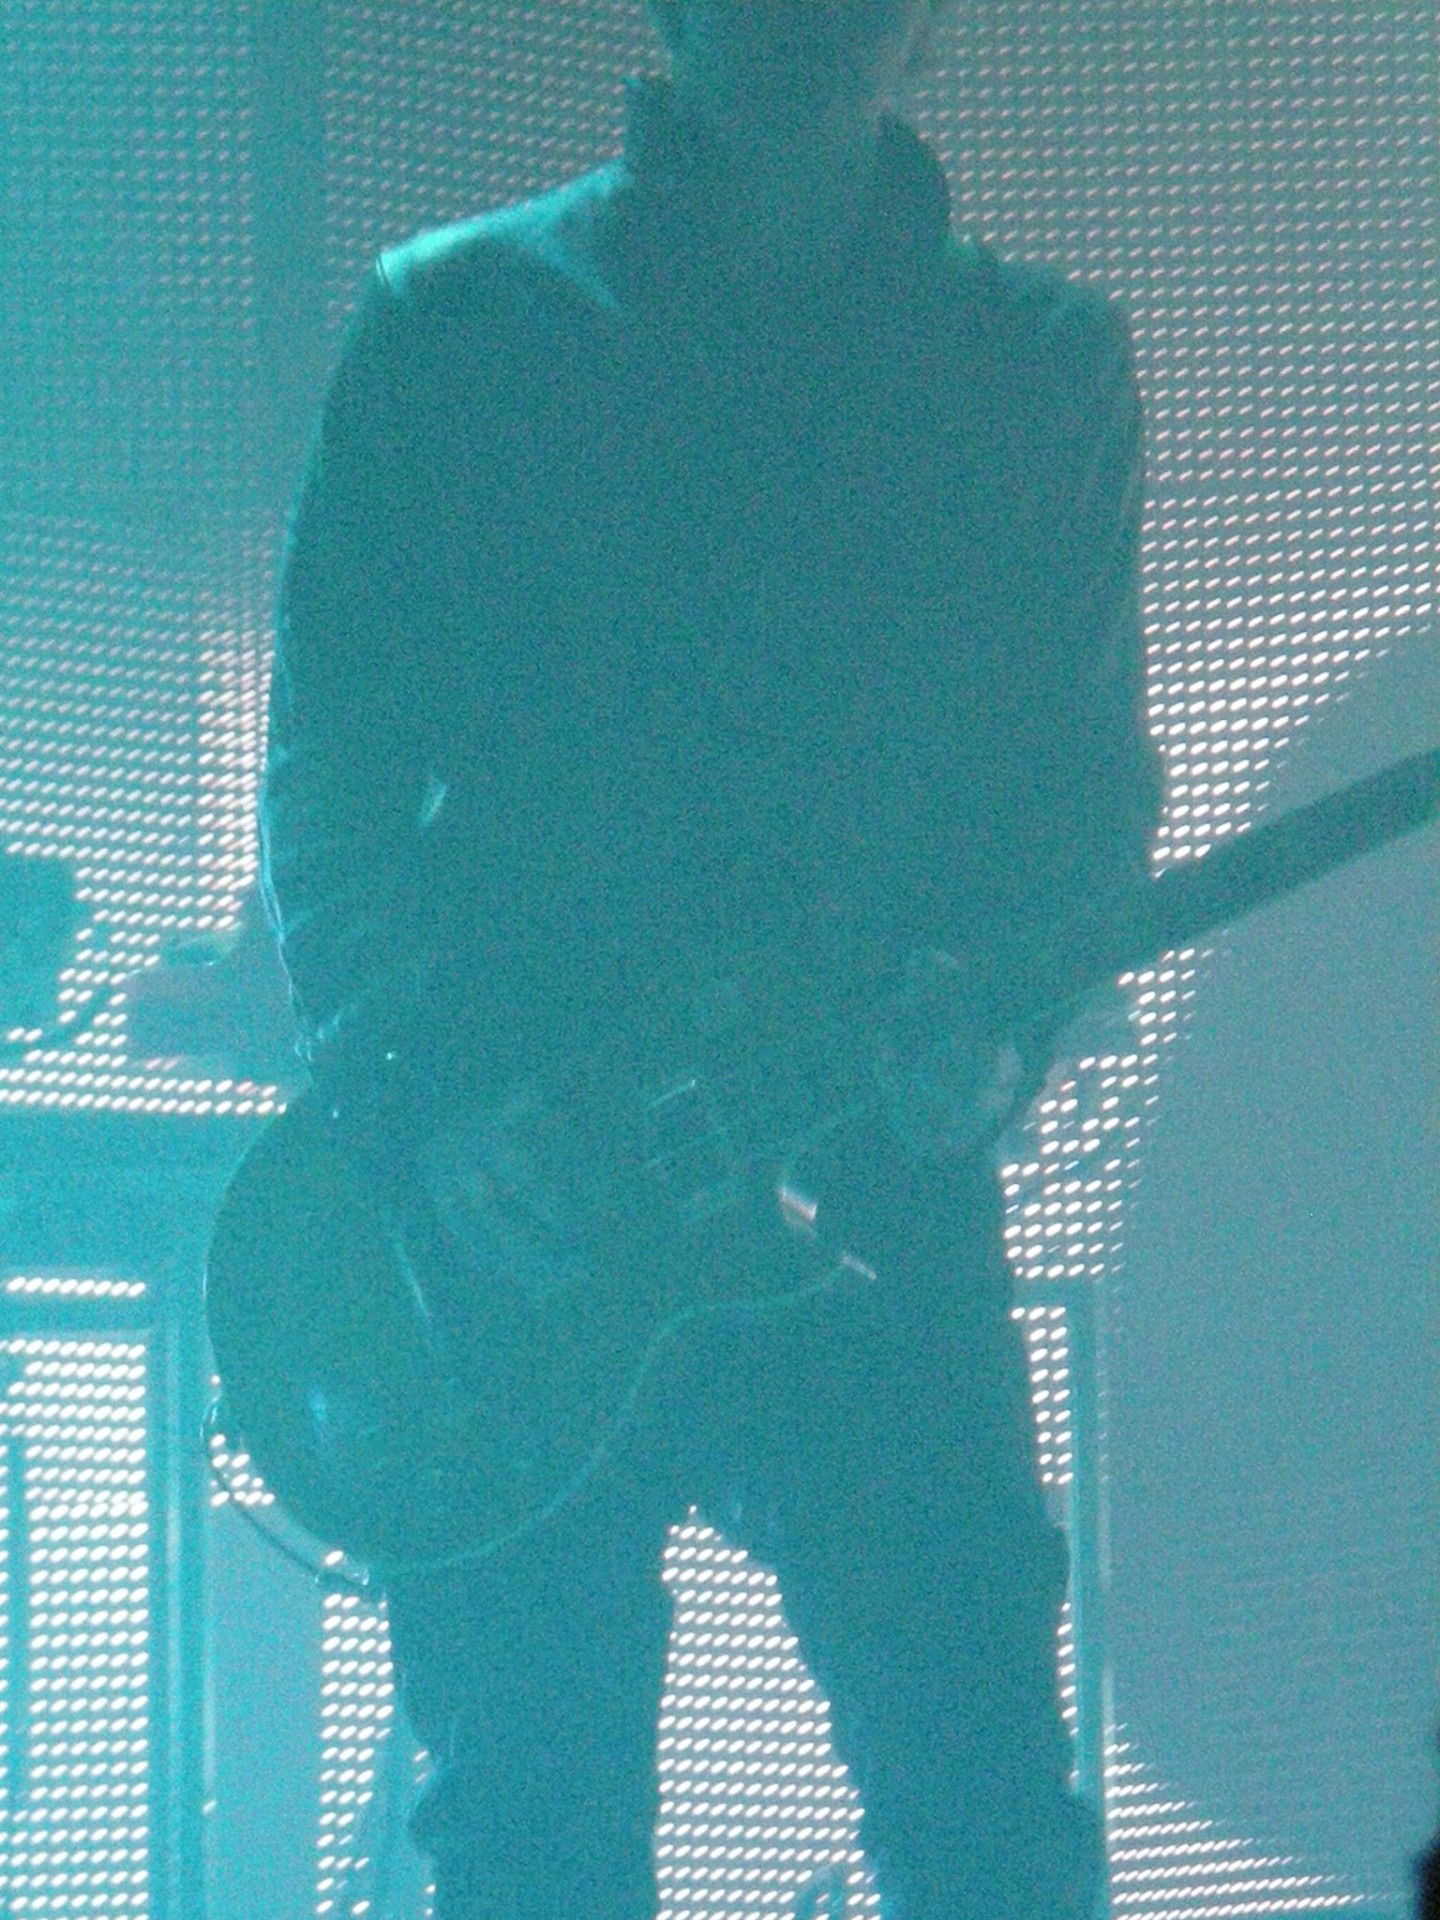 Live rock concert performance, male playing electric guitar blue lights